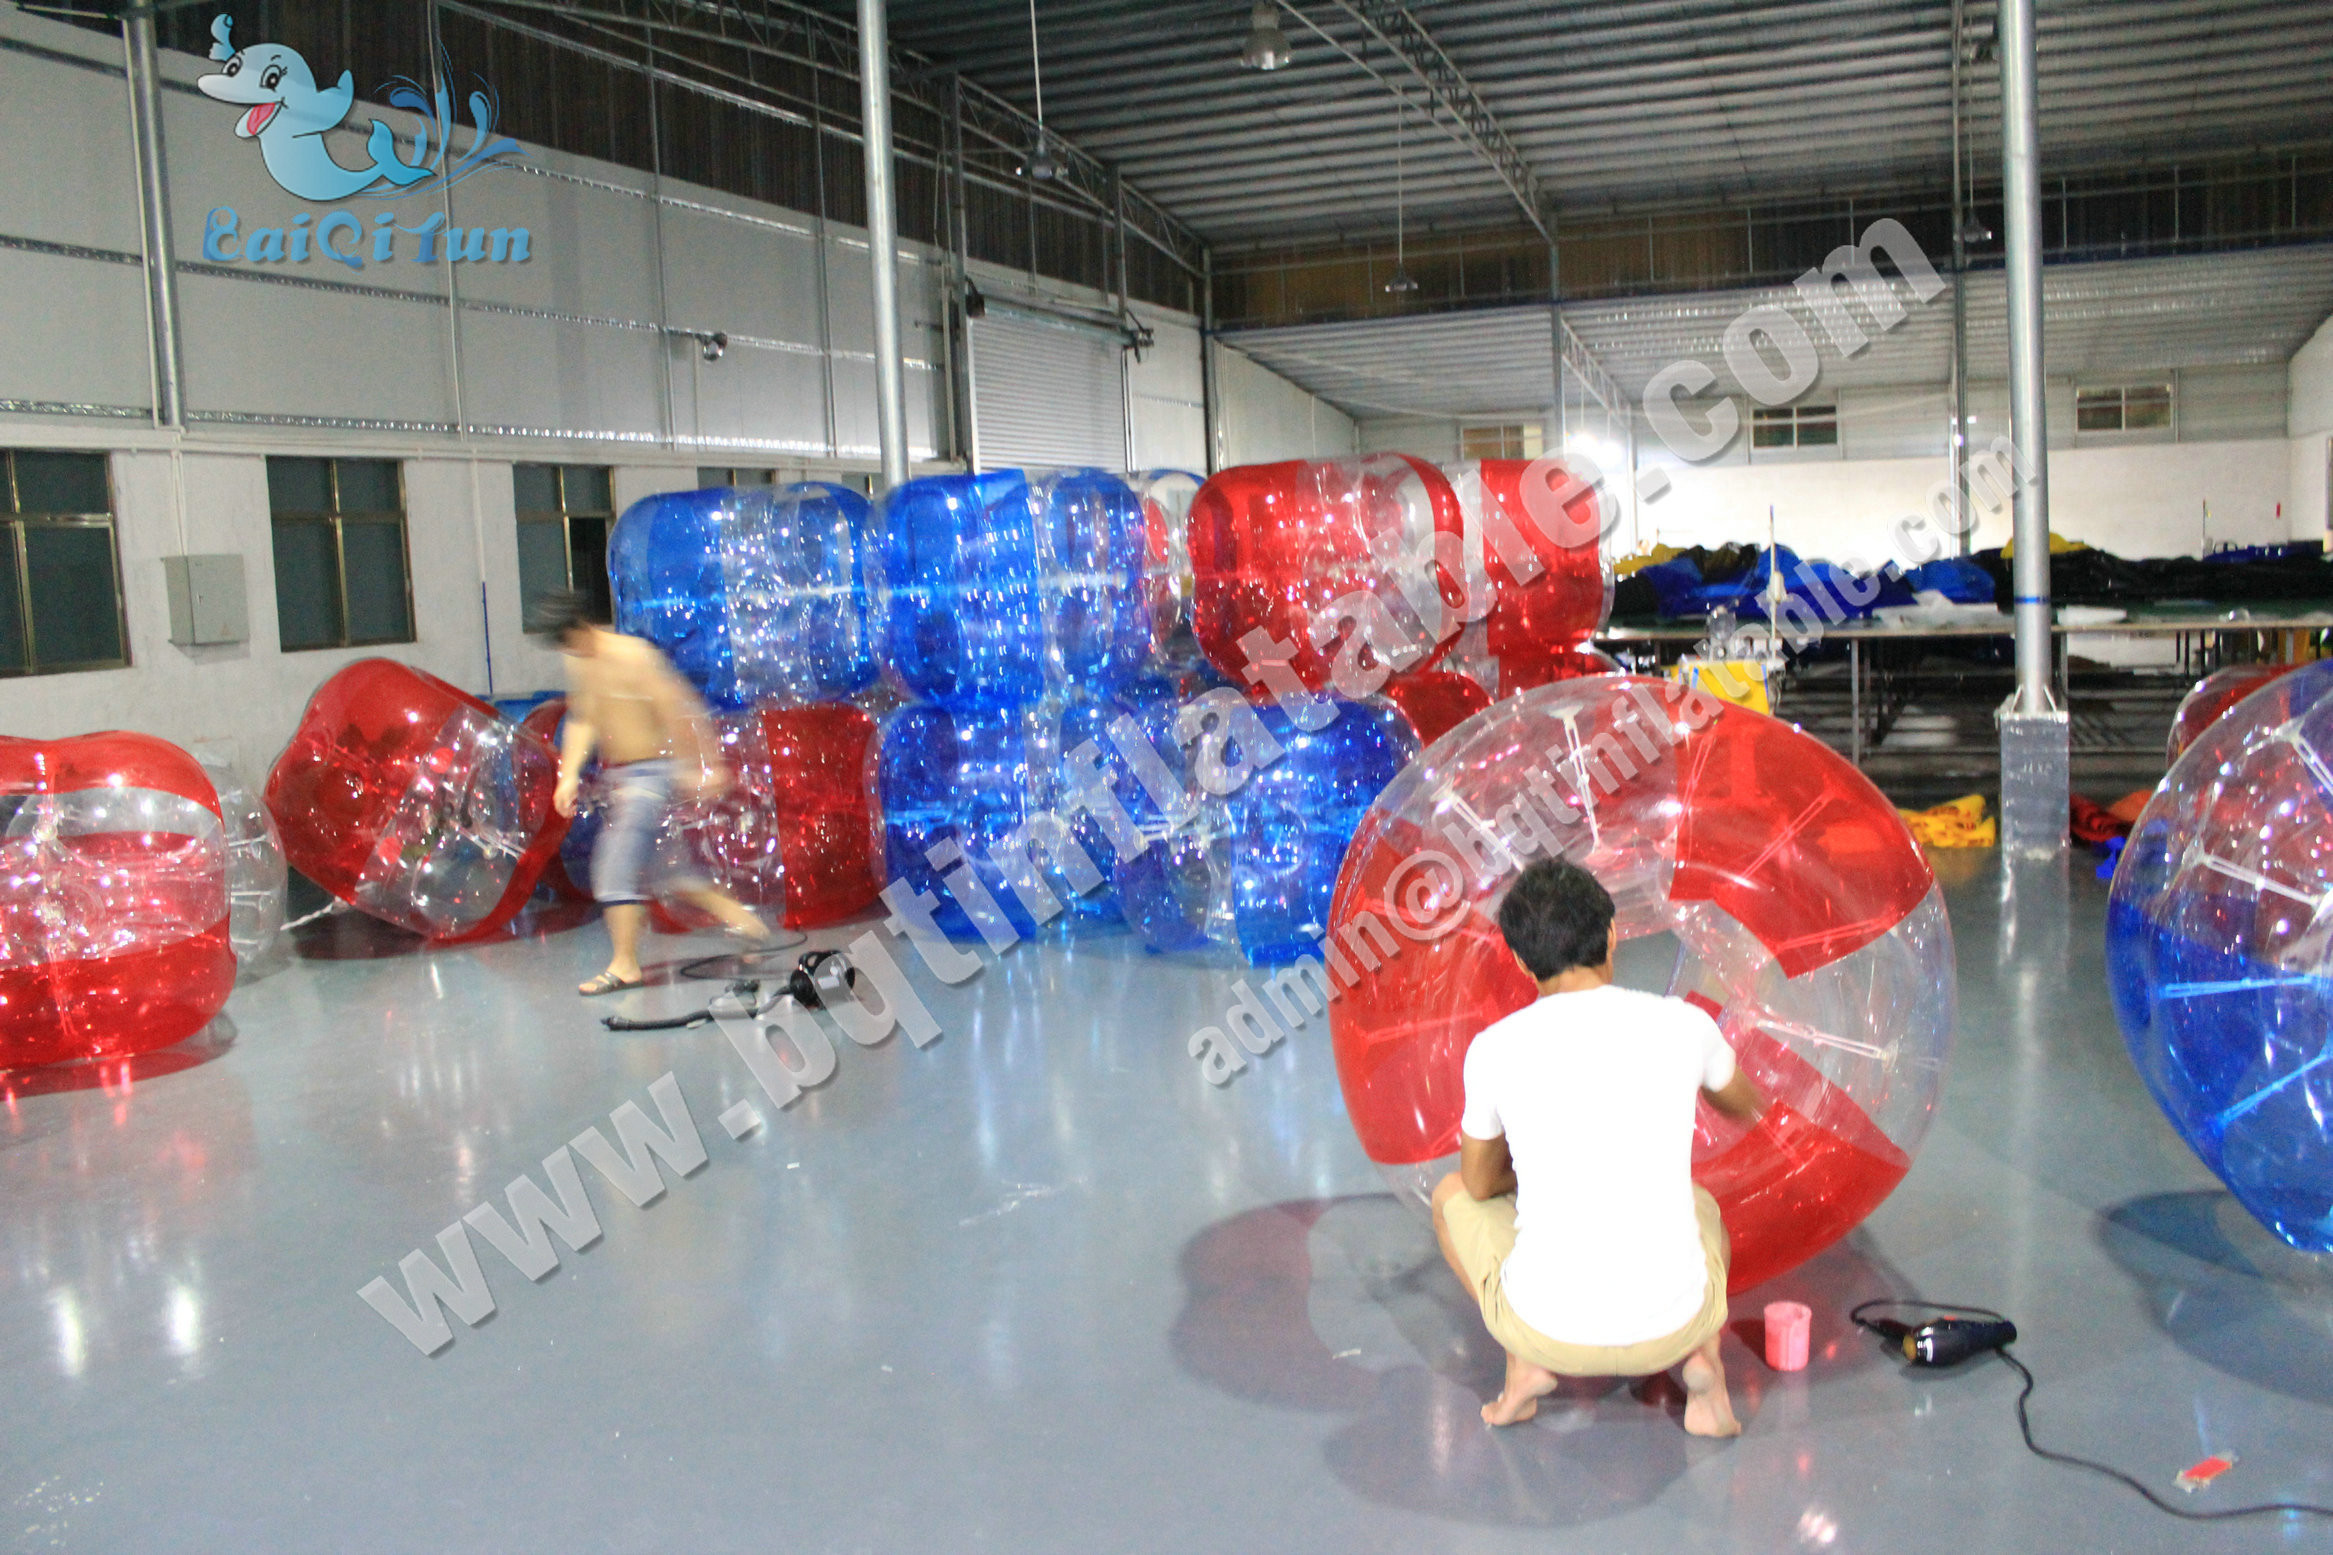 Wholesale Colour Bumper Ball,Soccer Bumper,Football Zorb,Human ball,inflatable sports bumper from china suppliers